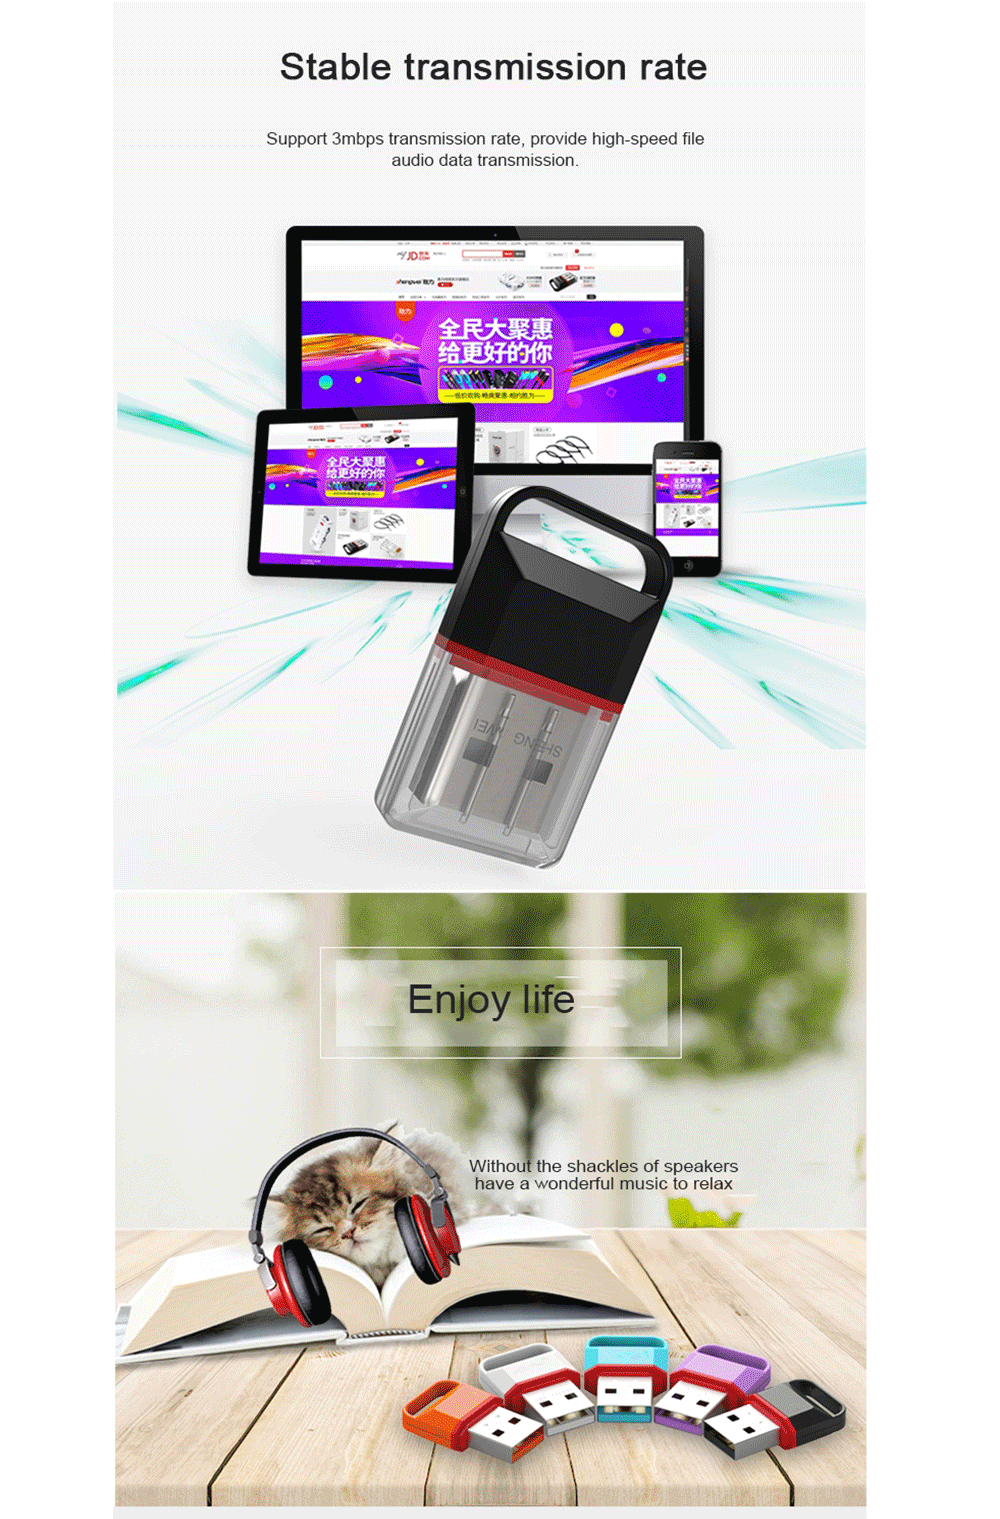 USB bluetooth4.0 Adapter Receiver Transmitter USB Dongle Supports Win8 for Mobile Phone Computer Headset Audio Shengwei UDC-324